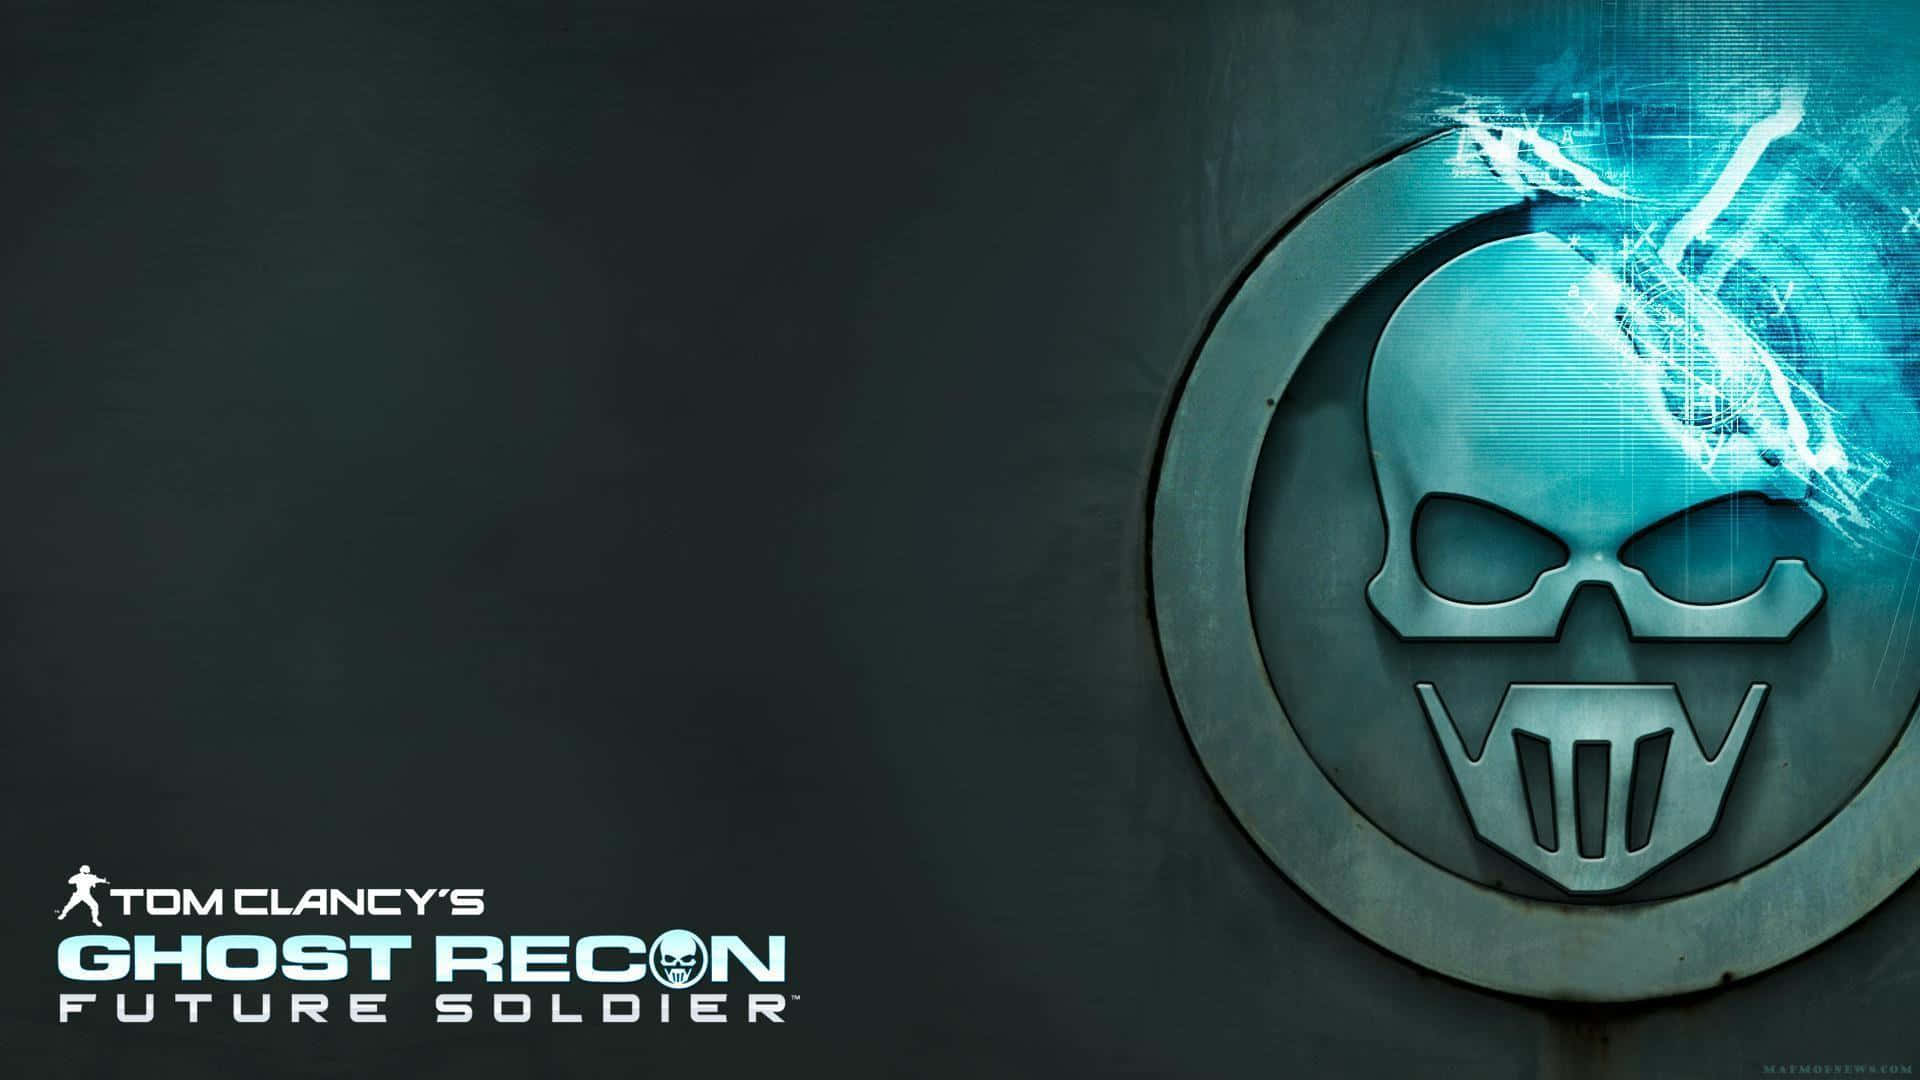 Get Ready for Action with Ghost Recon Wallpaper